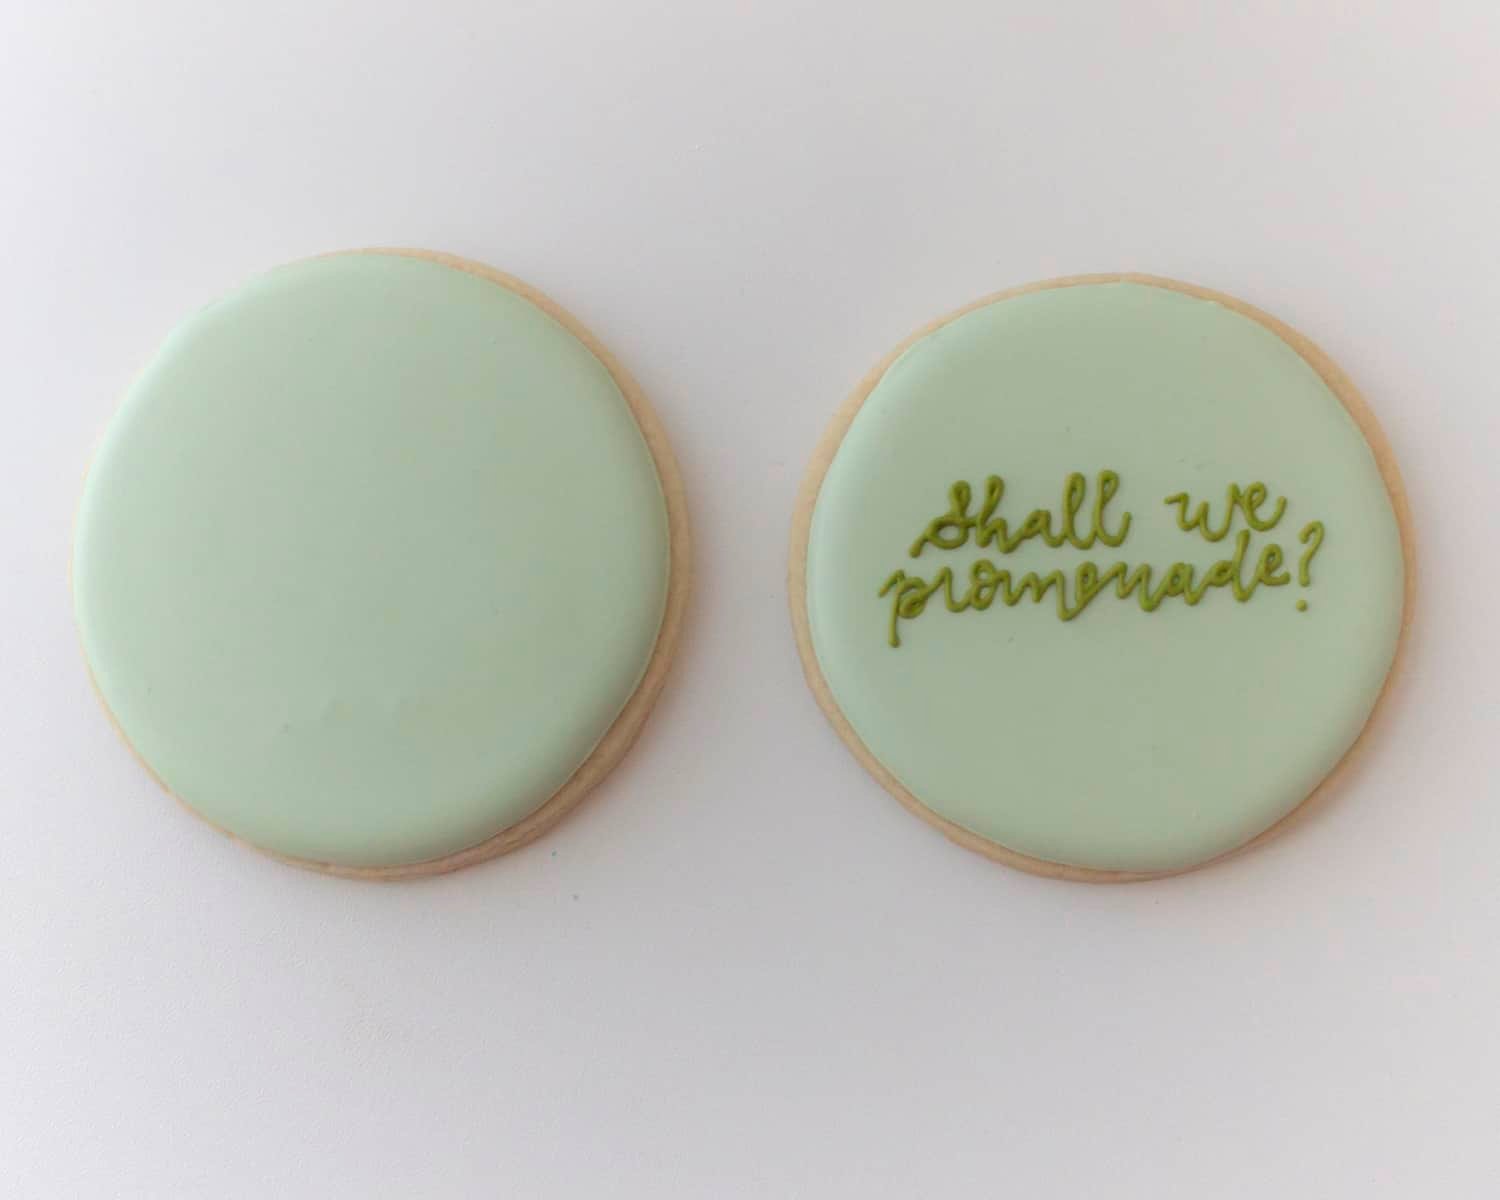 Ice cream cookies with the text "shall we promenade?"